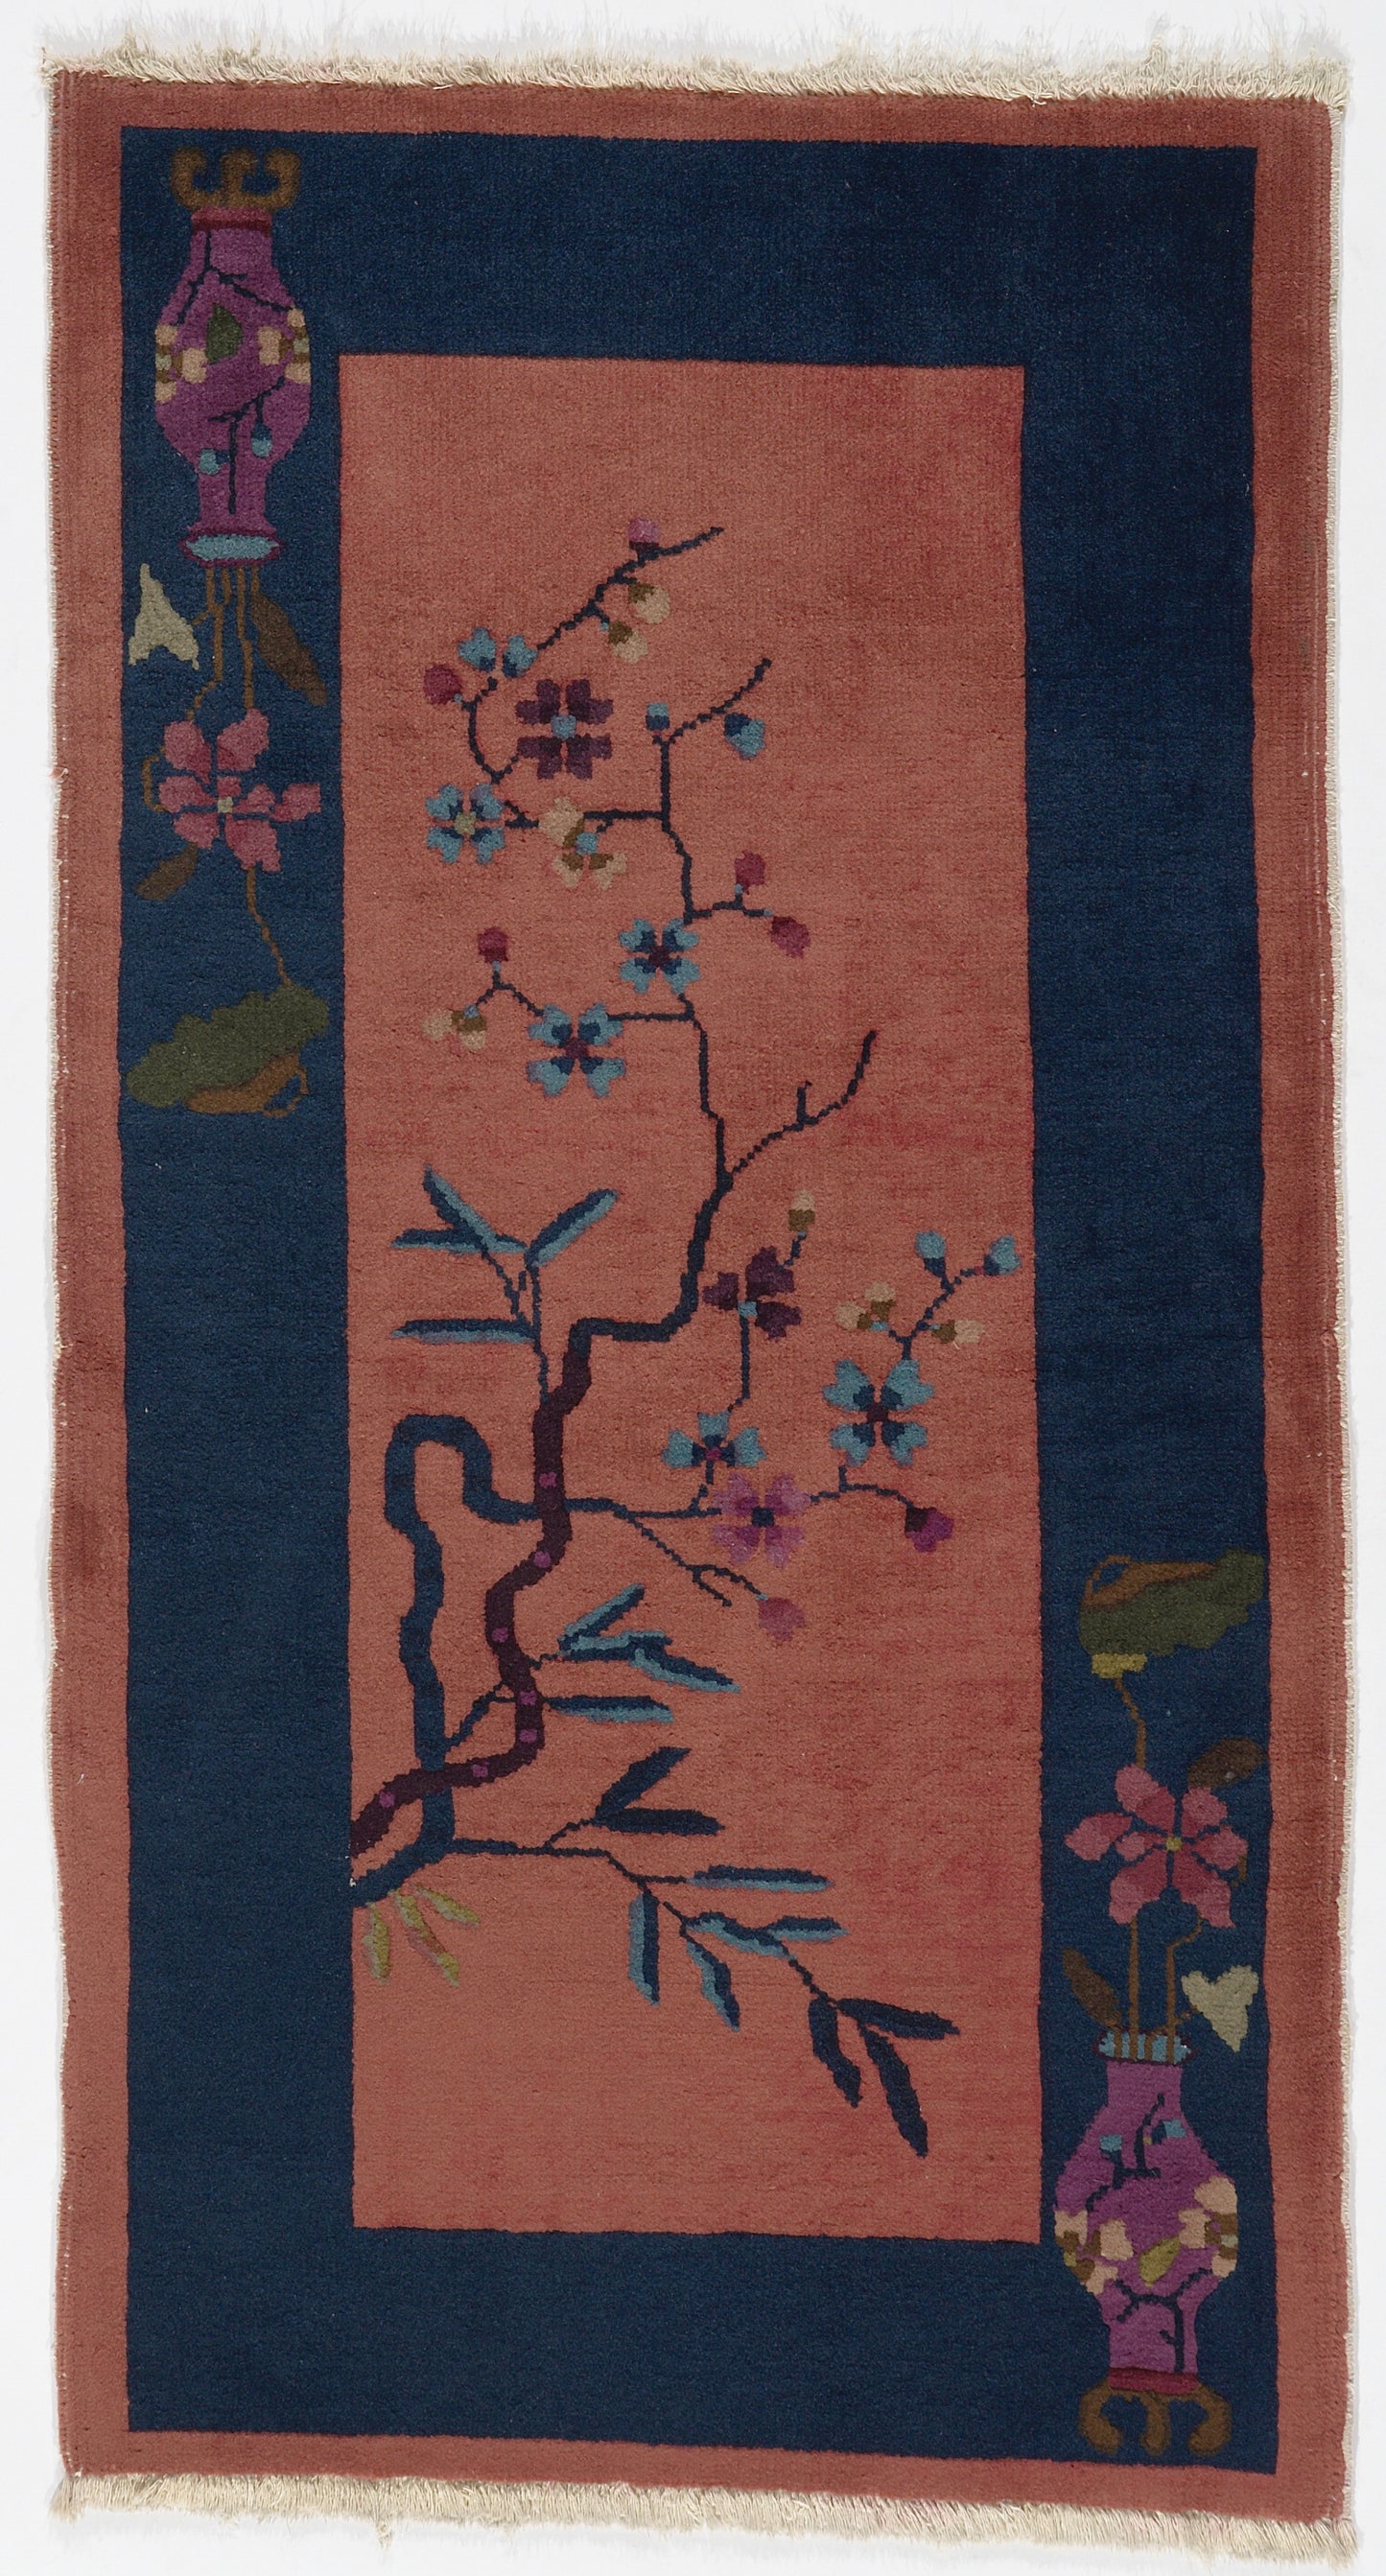 2'x4' Red and Navy Blue Floral Chinese Art Deco Rug